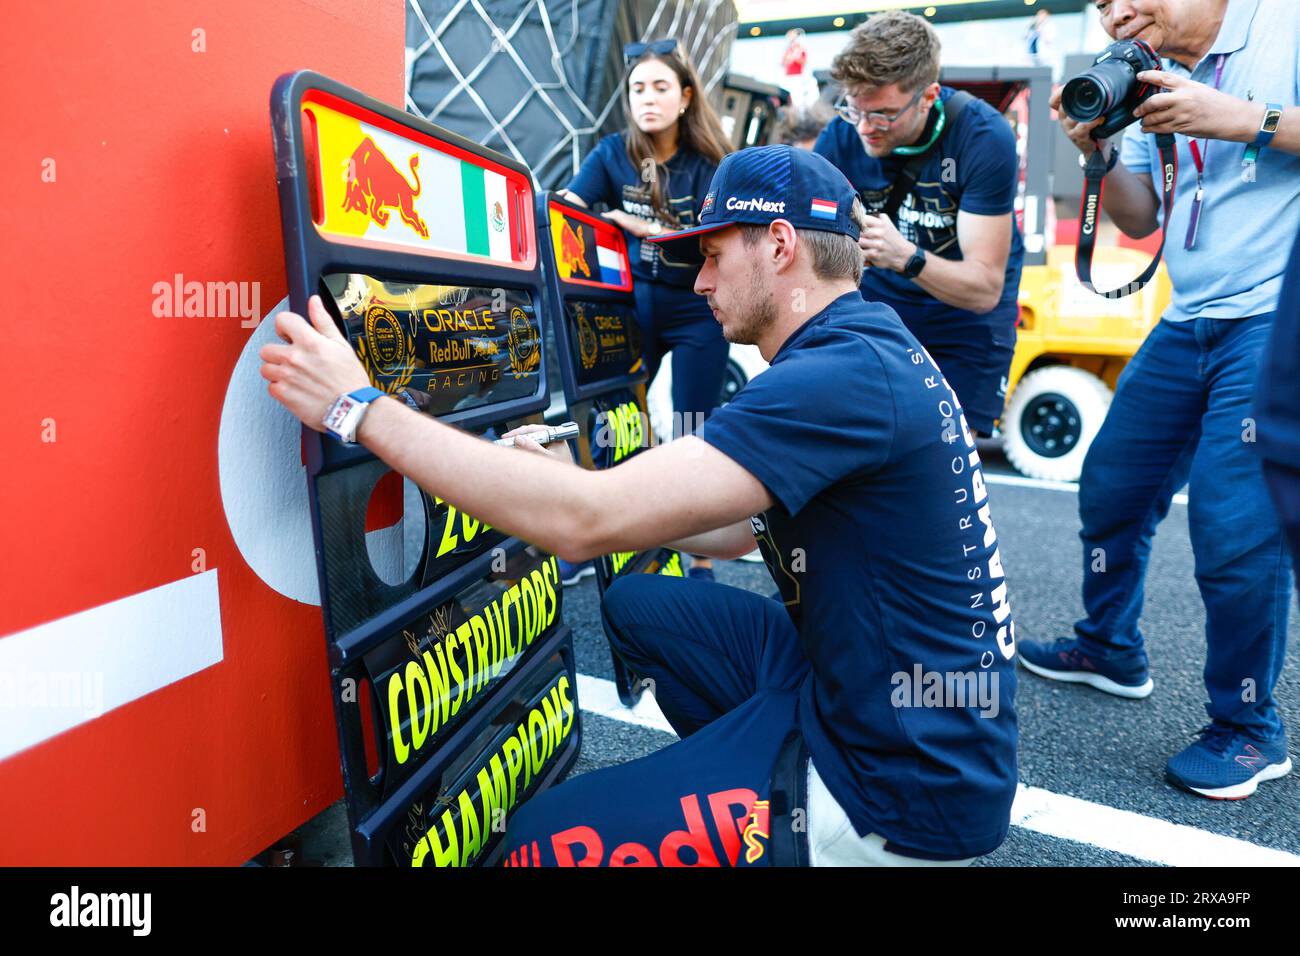 Oracle Red Bull Racing - F1® World Constructors' Champions - 2023